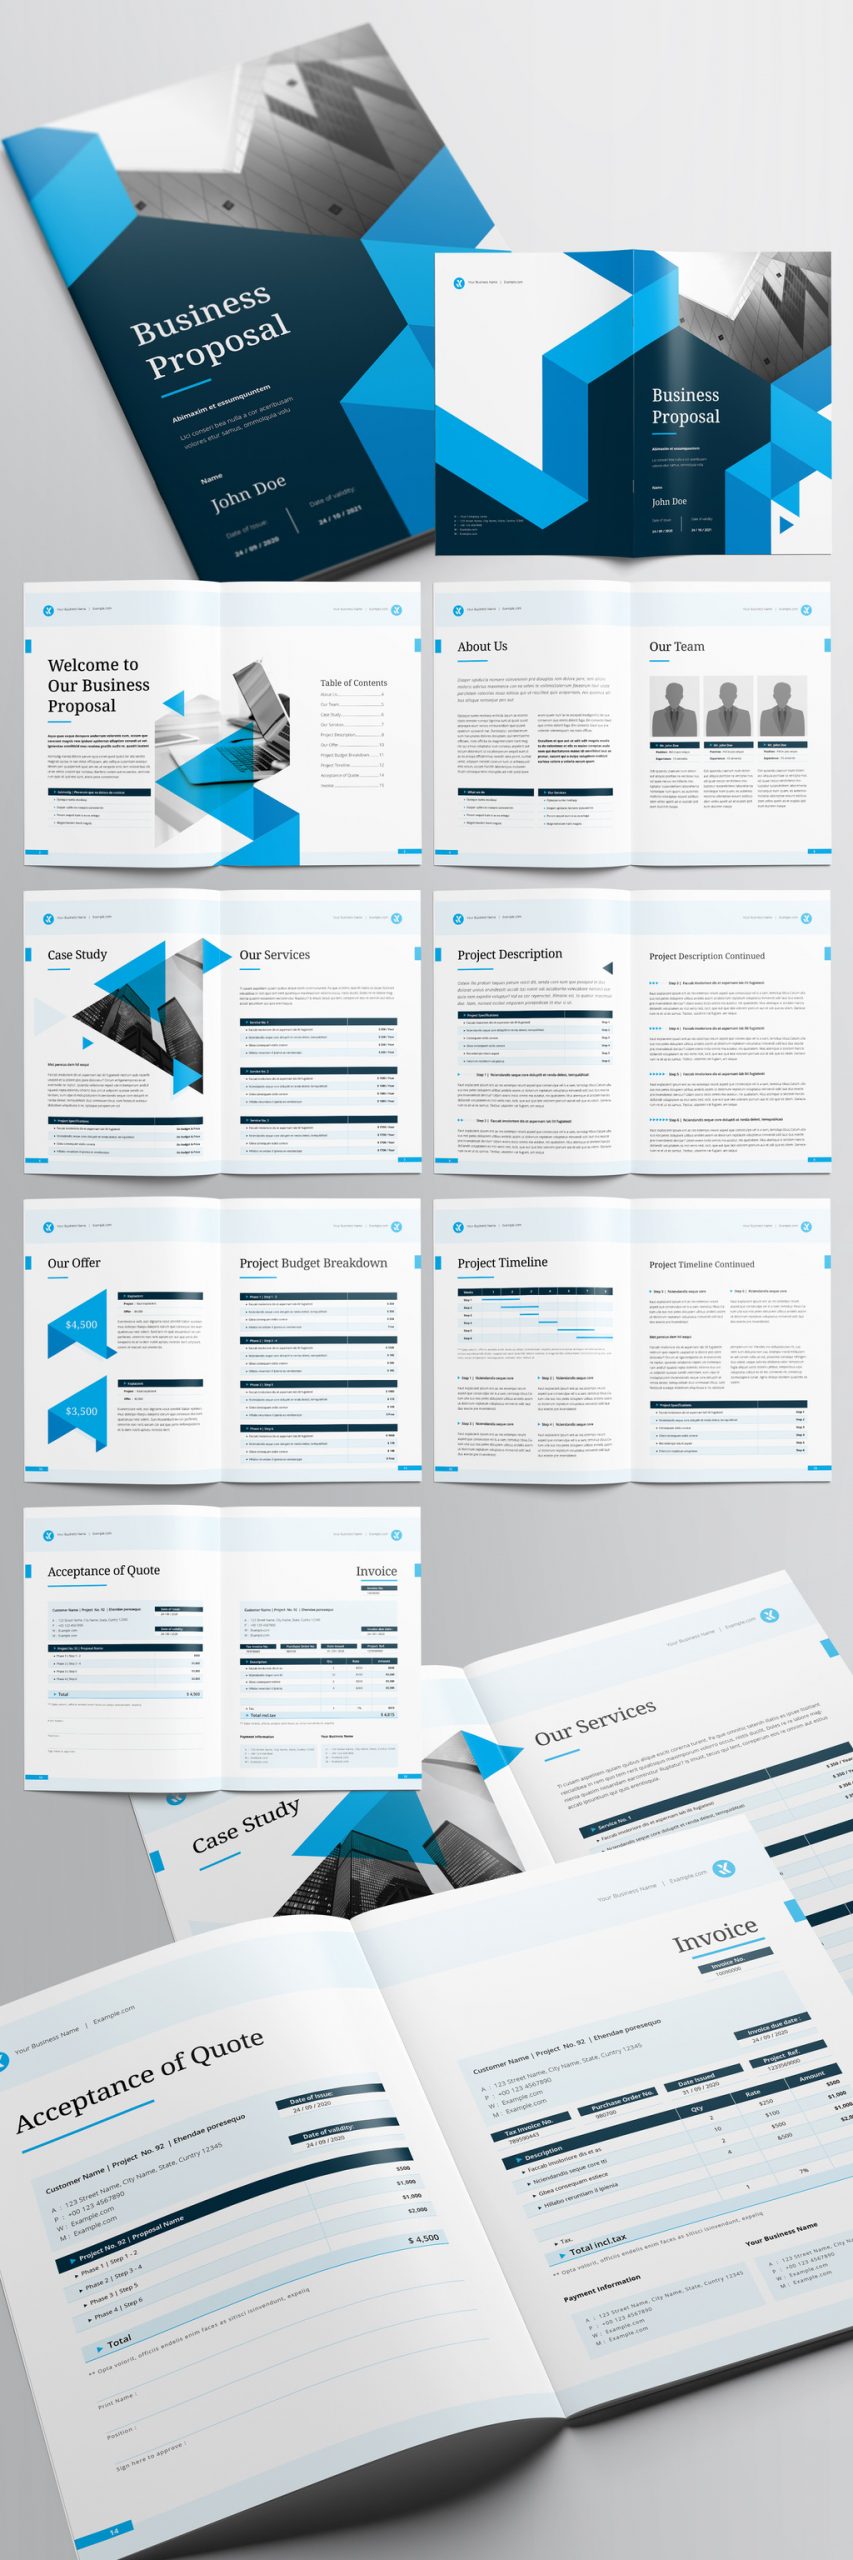 Business Proposal Template with Blue Accents Pertaining To Business Plan Template Indesign